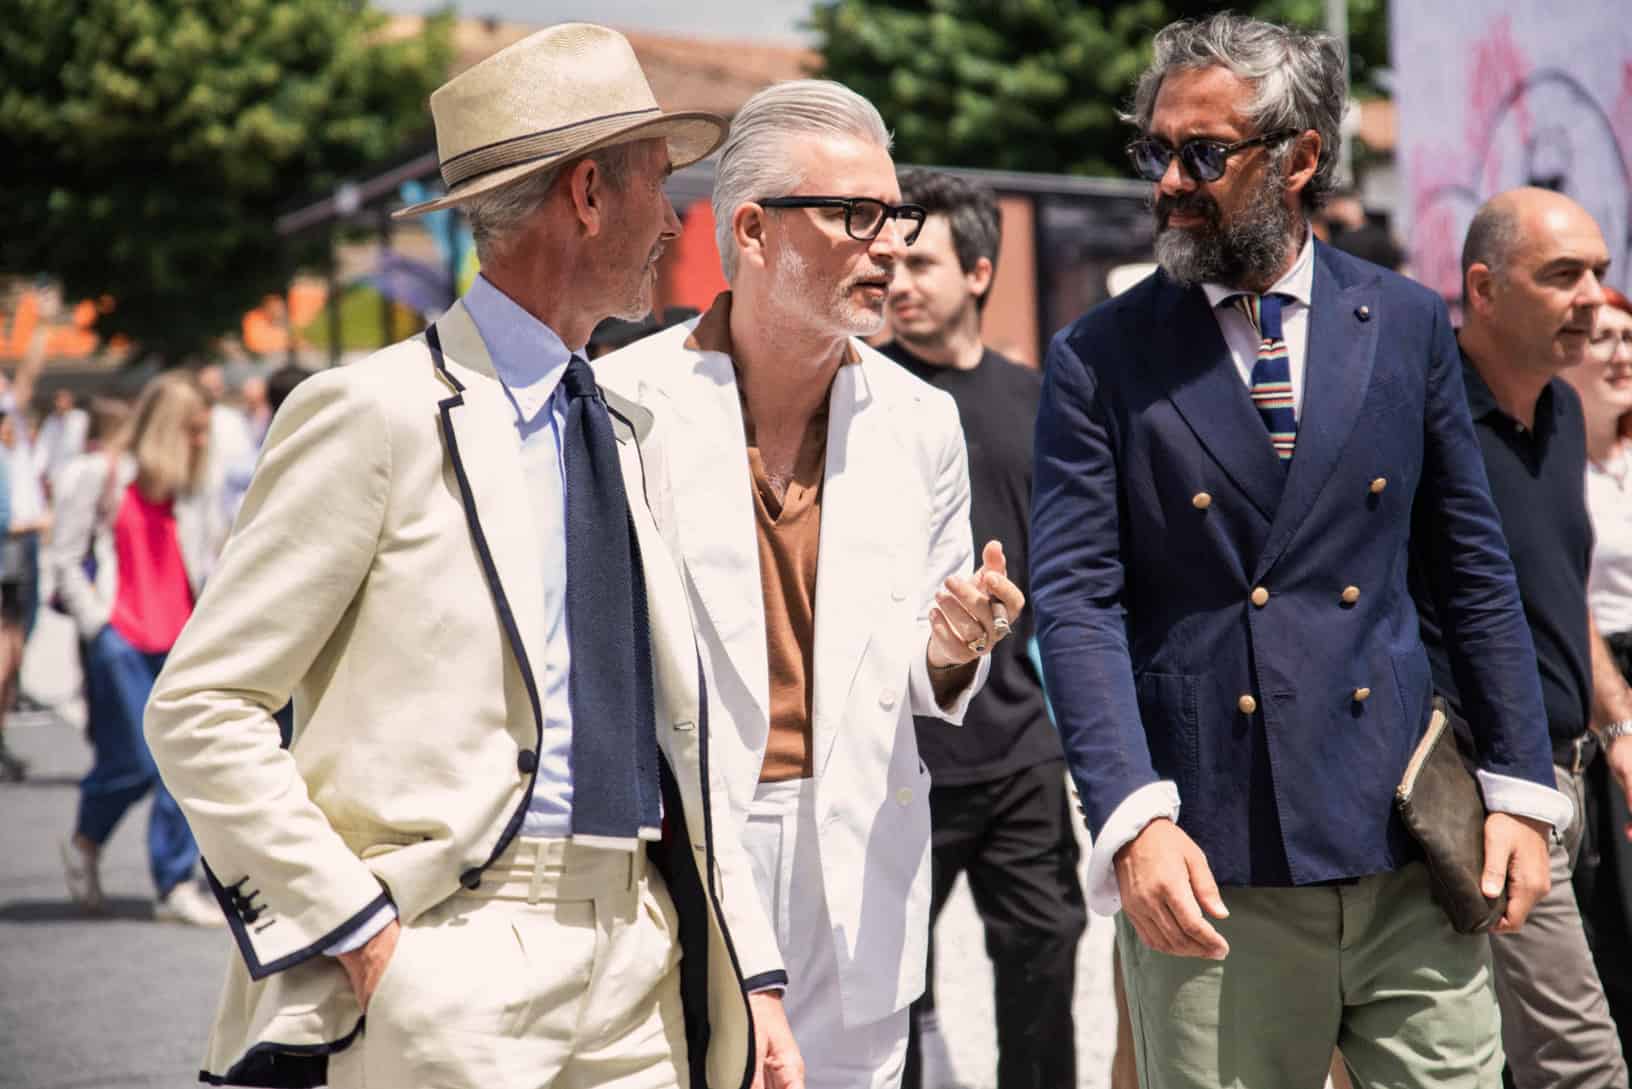 PITTI PEOPLE: THE BEST LOOKS FROM DAY TWO OF PITTI UOMO - MR Magazine